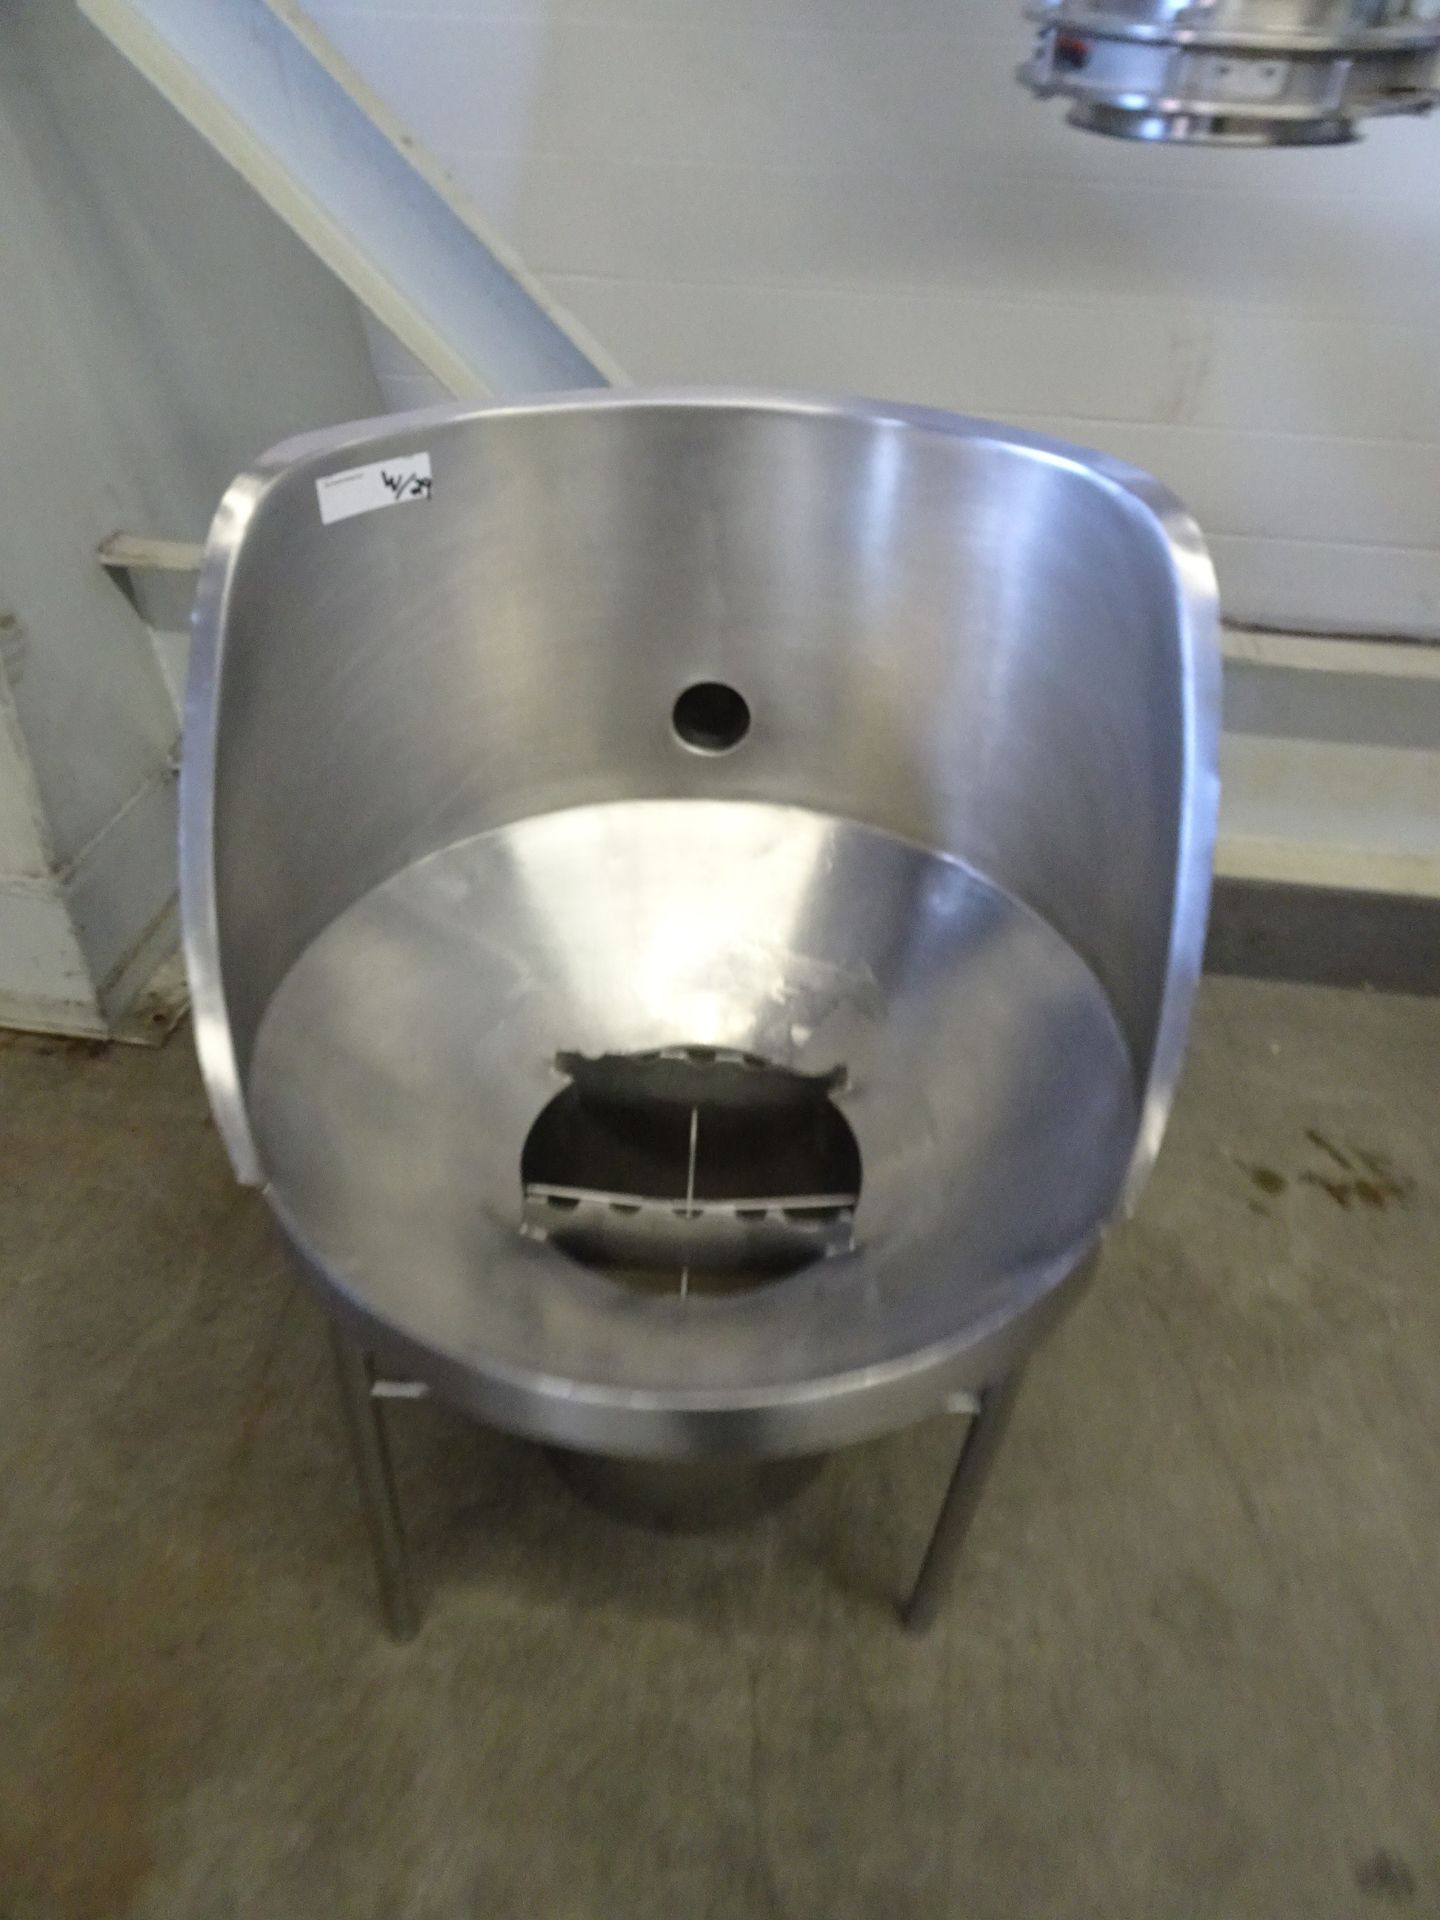 Approximately 50 Cubic Foot V-Shaped Vertical Blender. Please Note Disassembled To Bring Into - Image 5 of 6